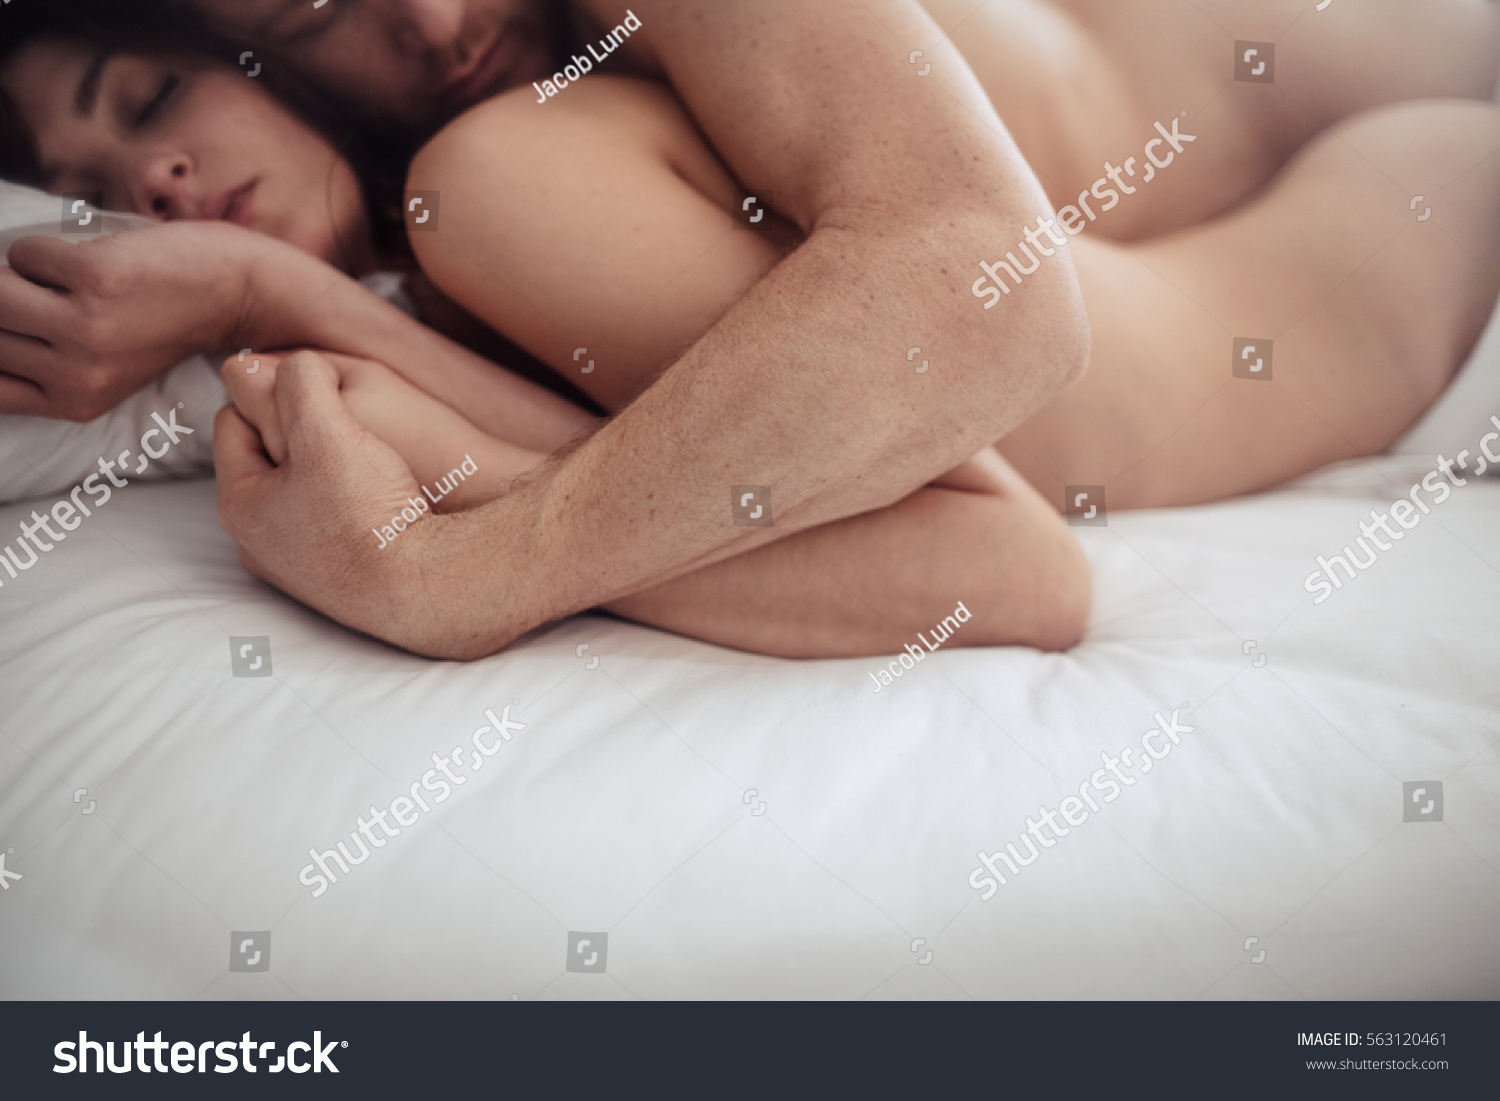 Making Love And Having Sex 9